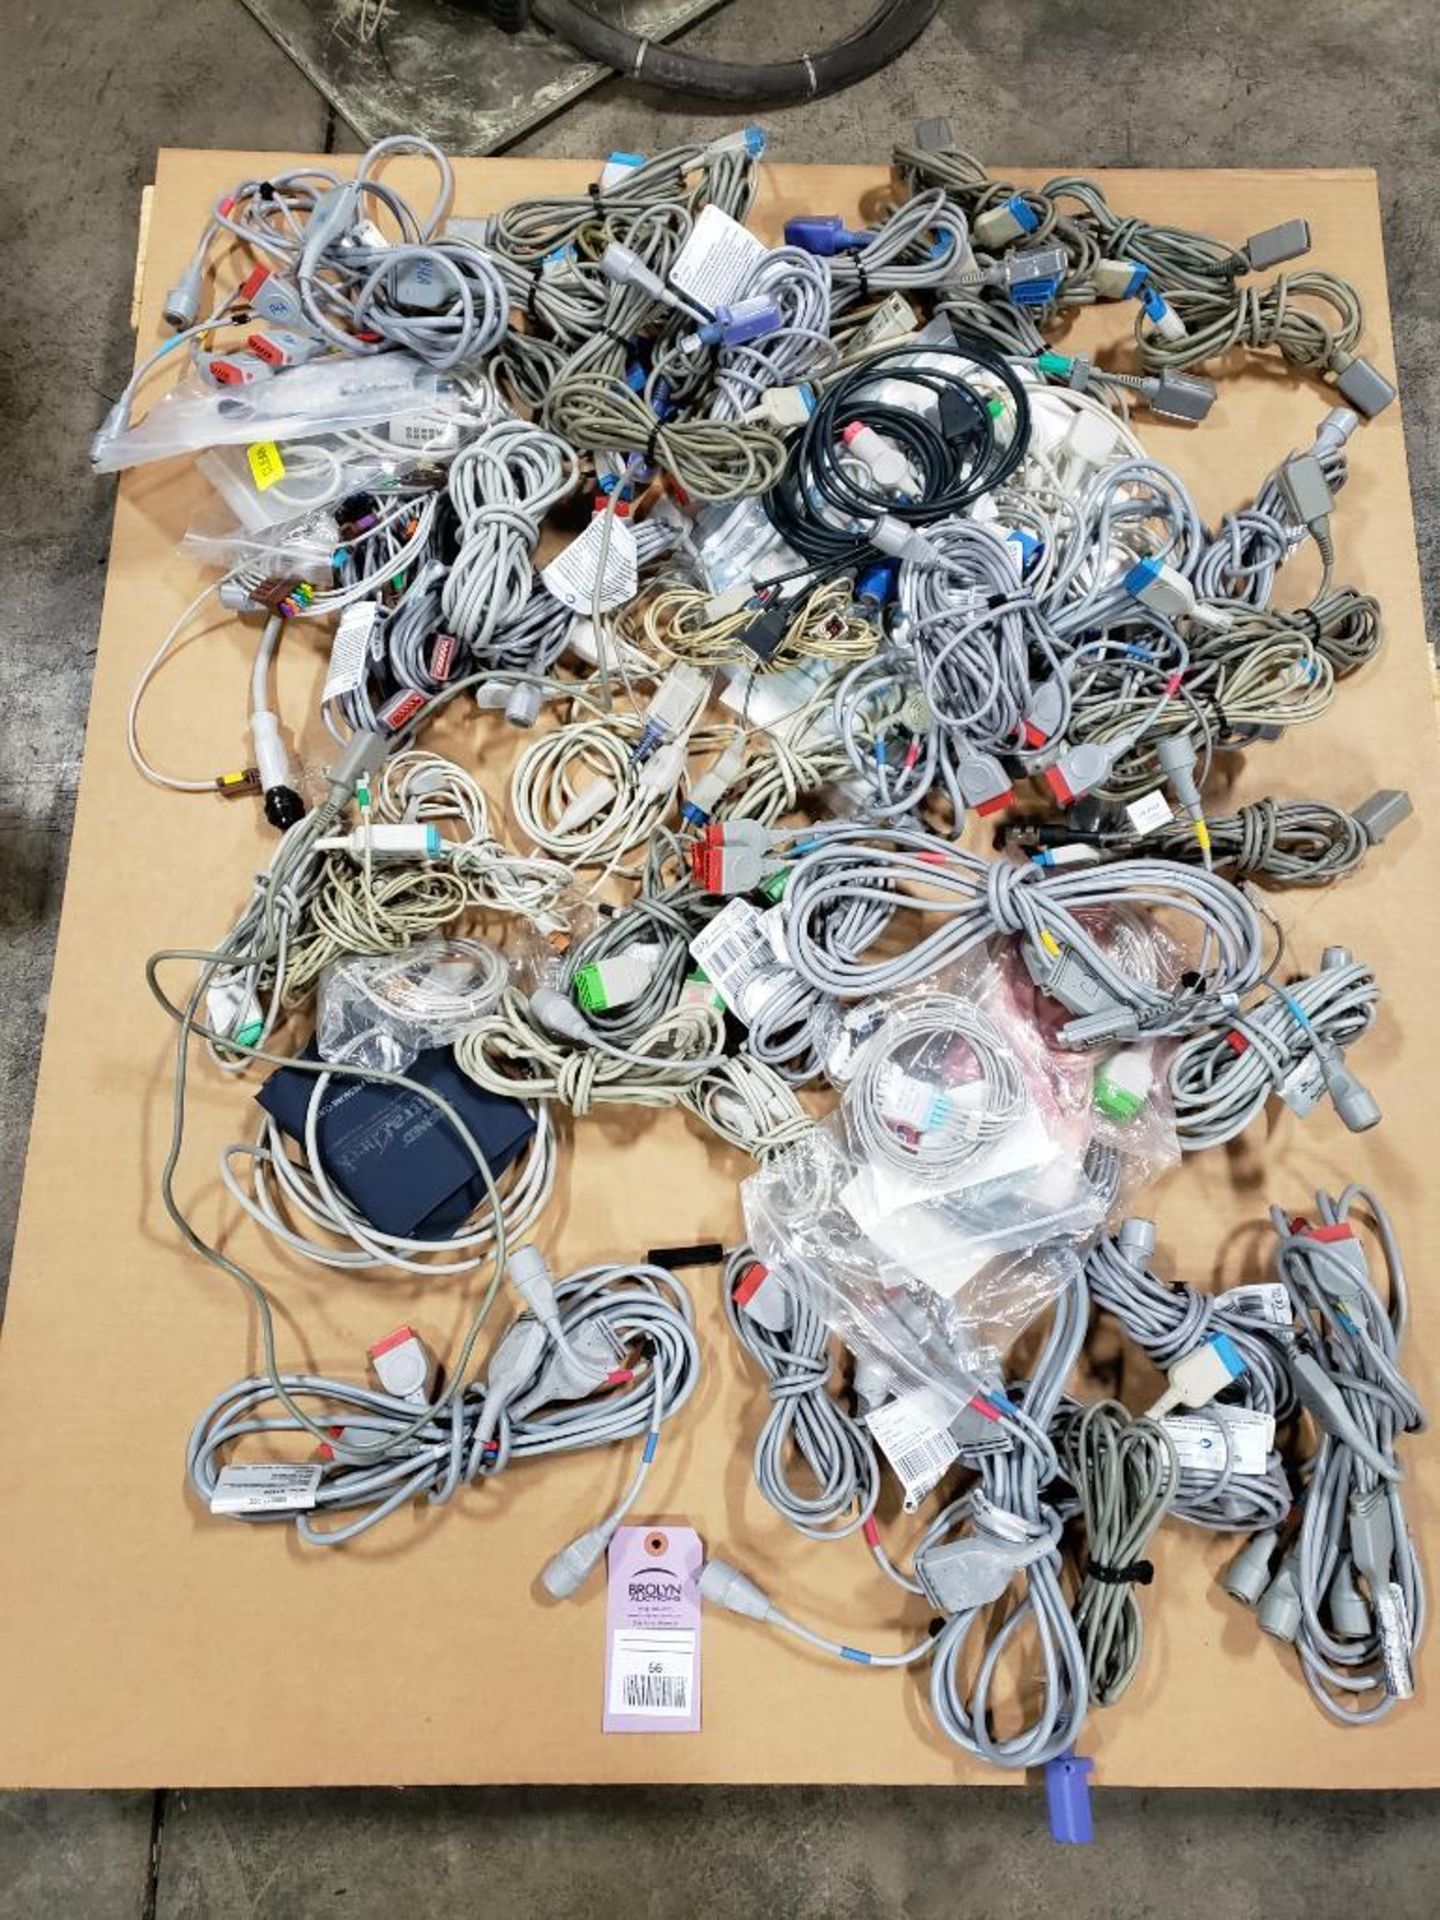 Large assortment of cords and cables.